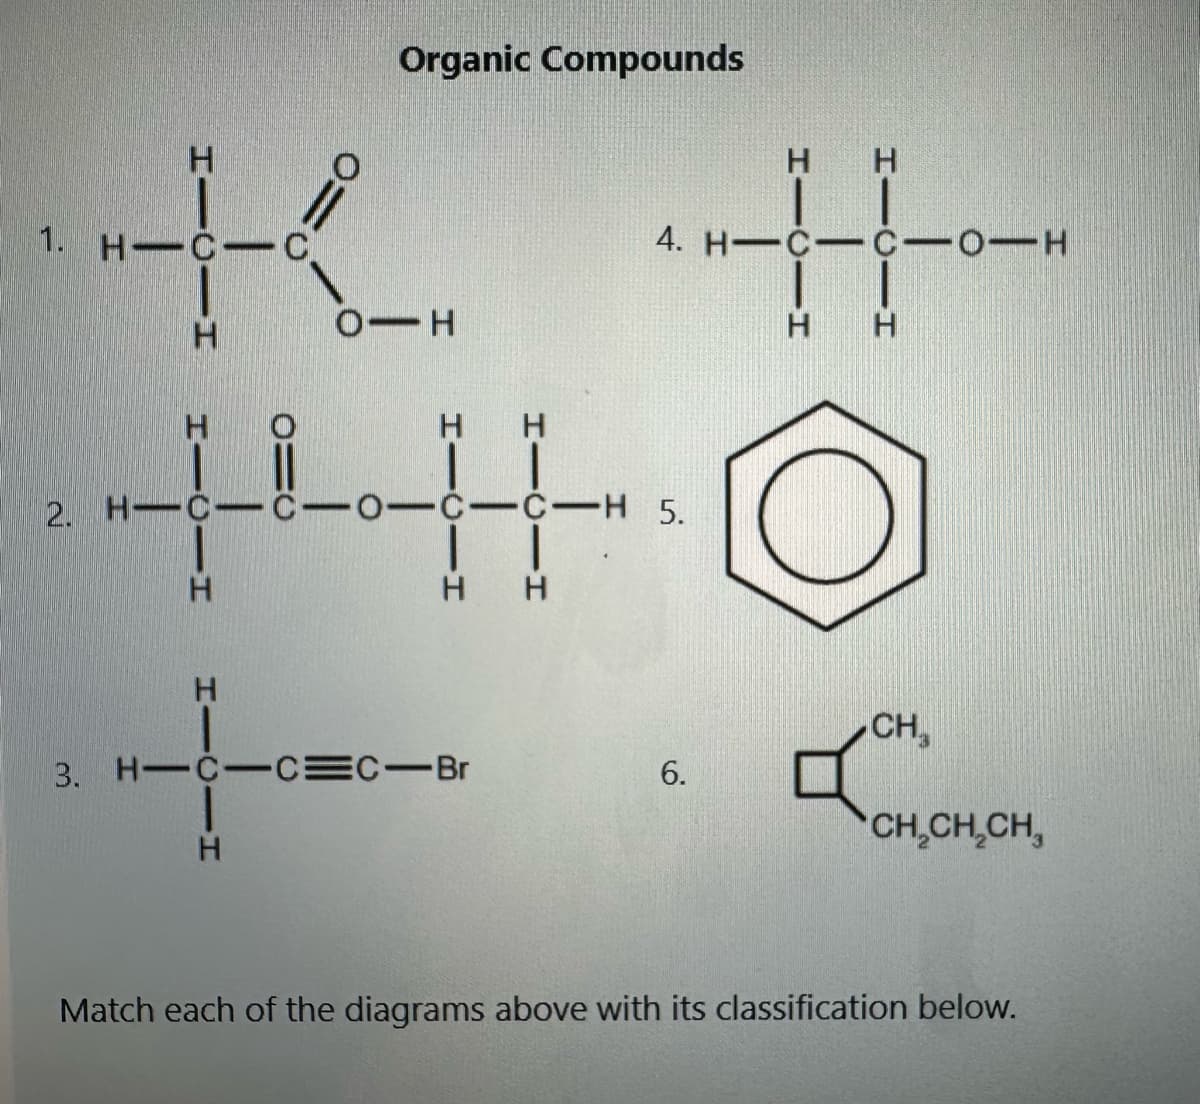 1. H-C-C
H
>=
Organic Compounds
H
о-н
H
2. HC-C-0-C-C-H 5.
H
3. H-C-C=C-Br
H
H
H
4. HC CIOIH
H
H H
I
H
6.
CH₂
CH₂CH₂CH₂
Match each of the diagrams above with its classification below.